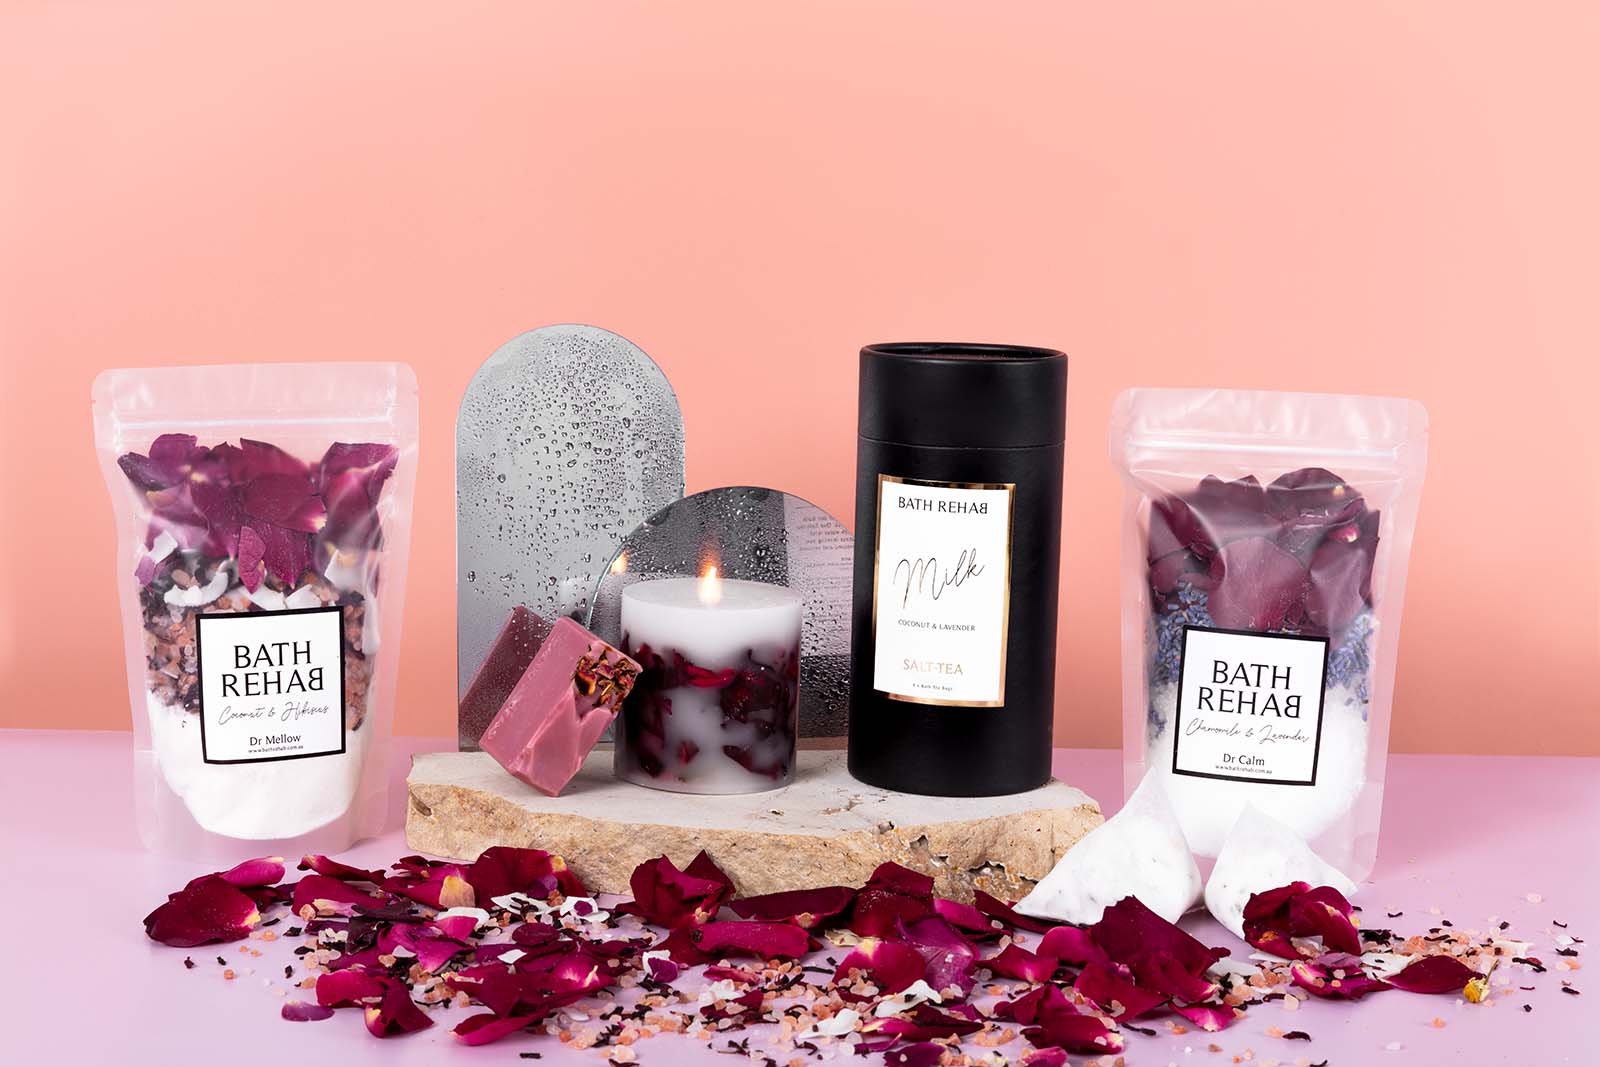 Creative Styled Images for a Bath Soak Brand Bath Rehab. Styled Product Photography by Megzie Makes